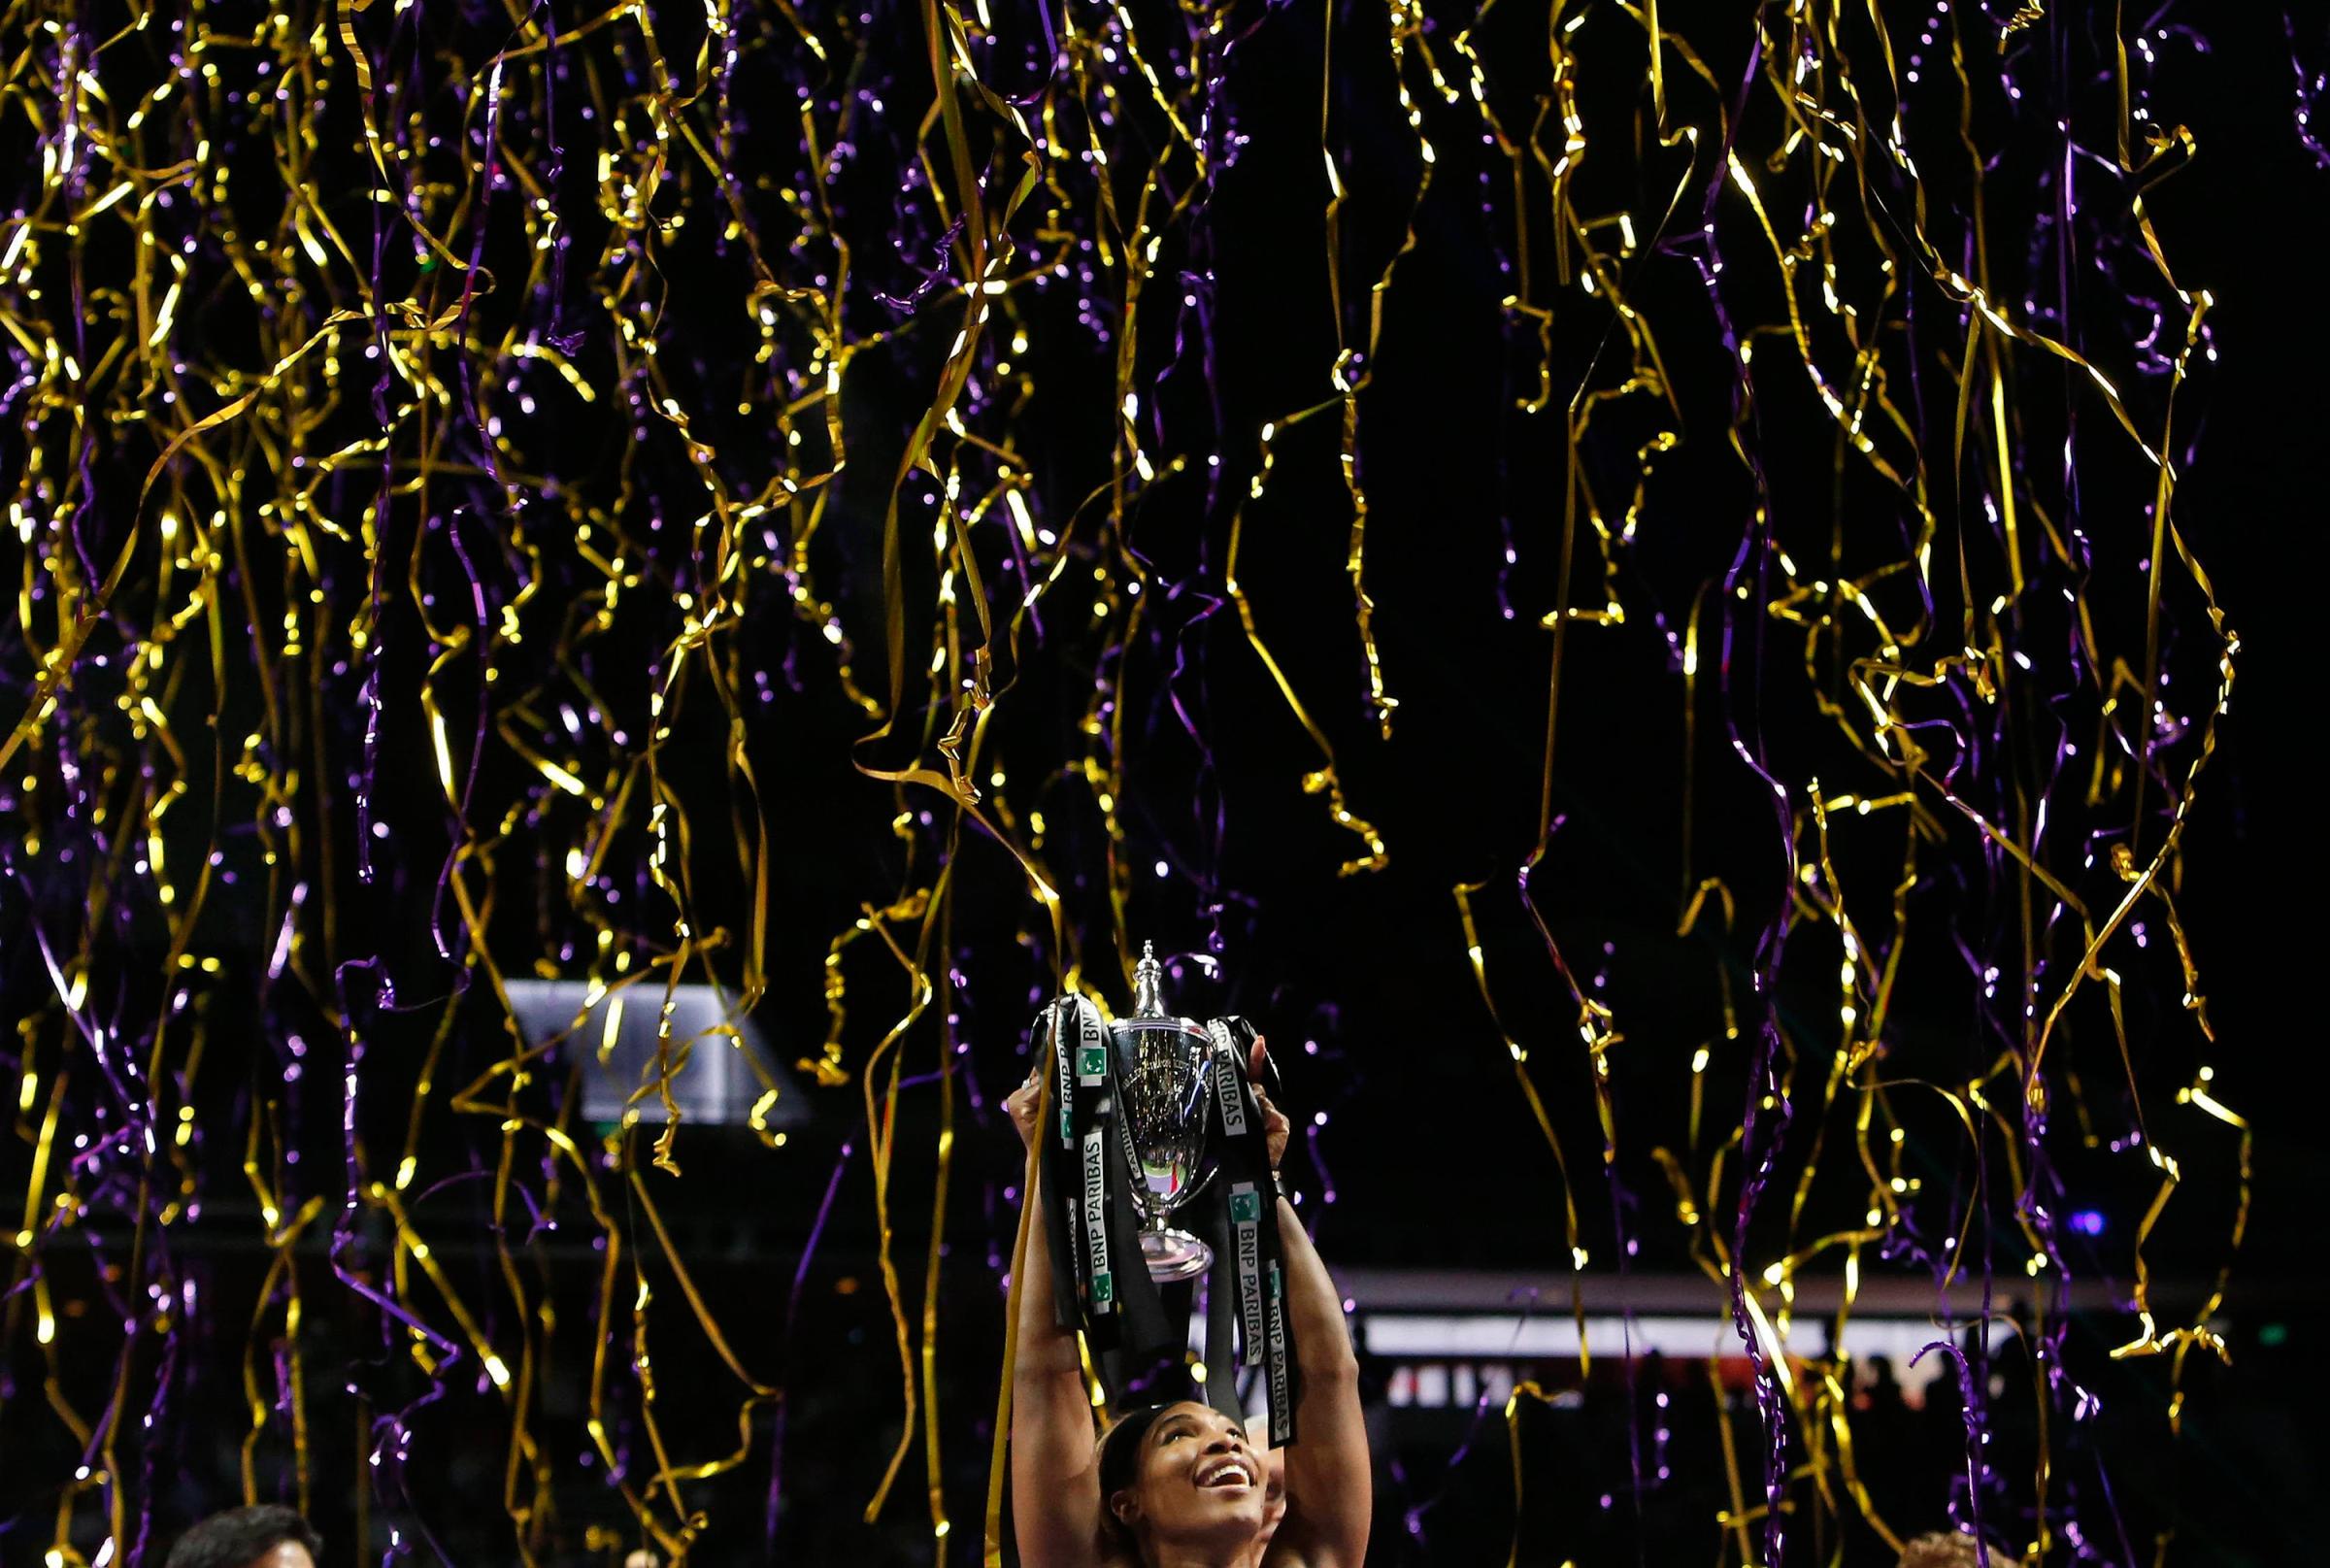 Serena Williams of the U.S. poses with the trophy after defeating Simona Halep of Romania in the women's singles final tennis match of the WTA Finals at the Singapore Indoor Stadium on October 26, 2014.